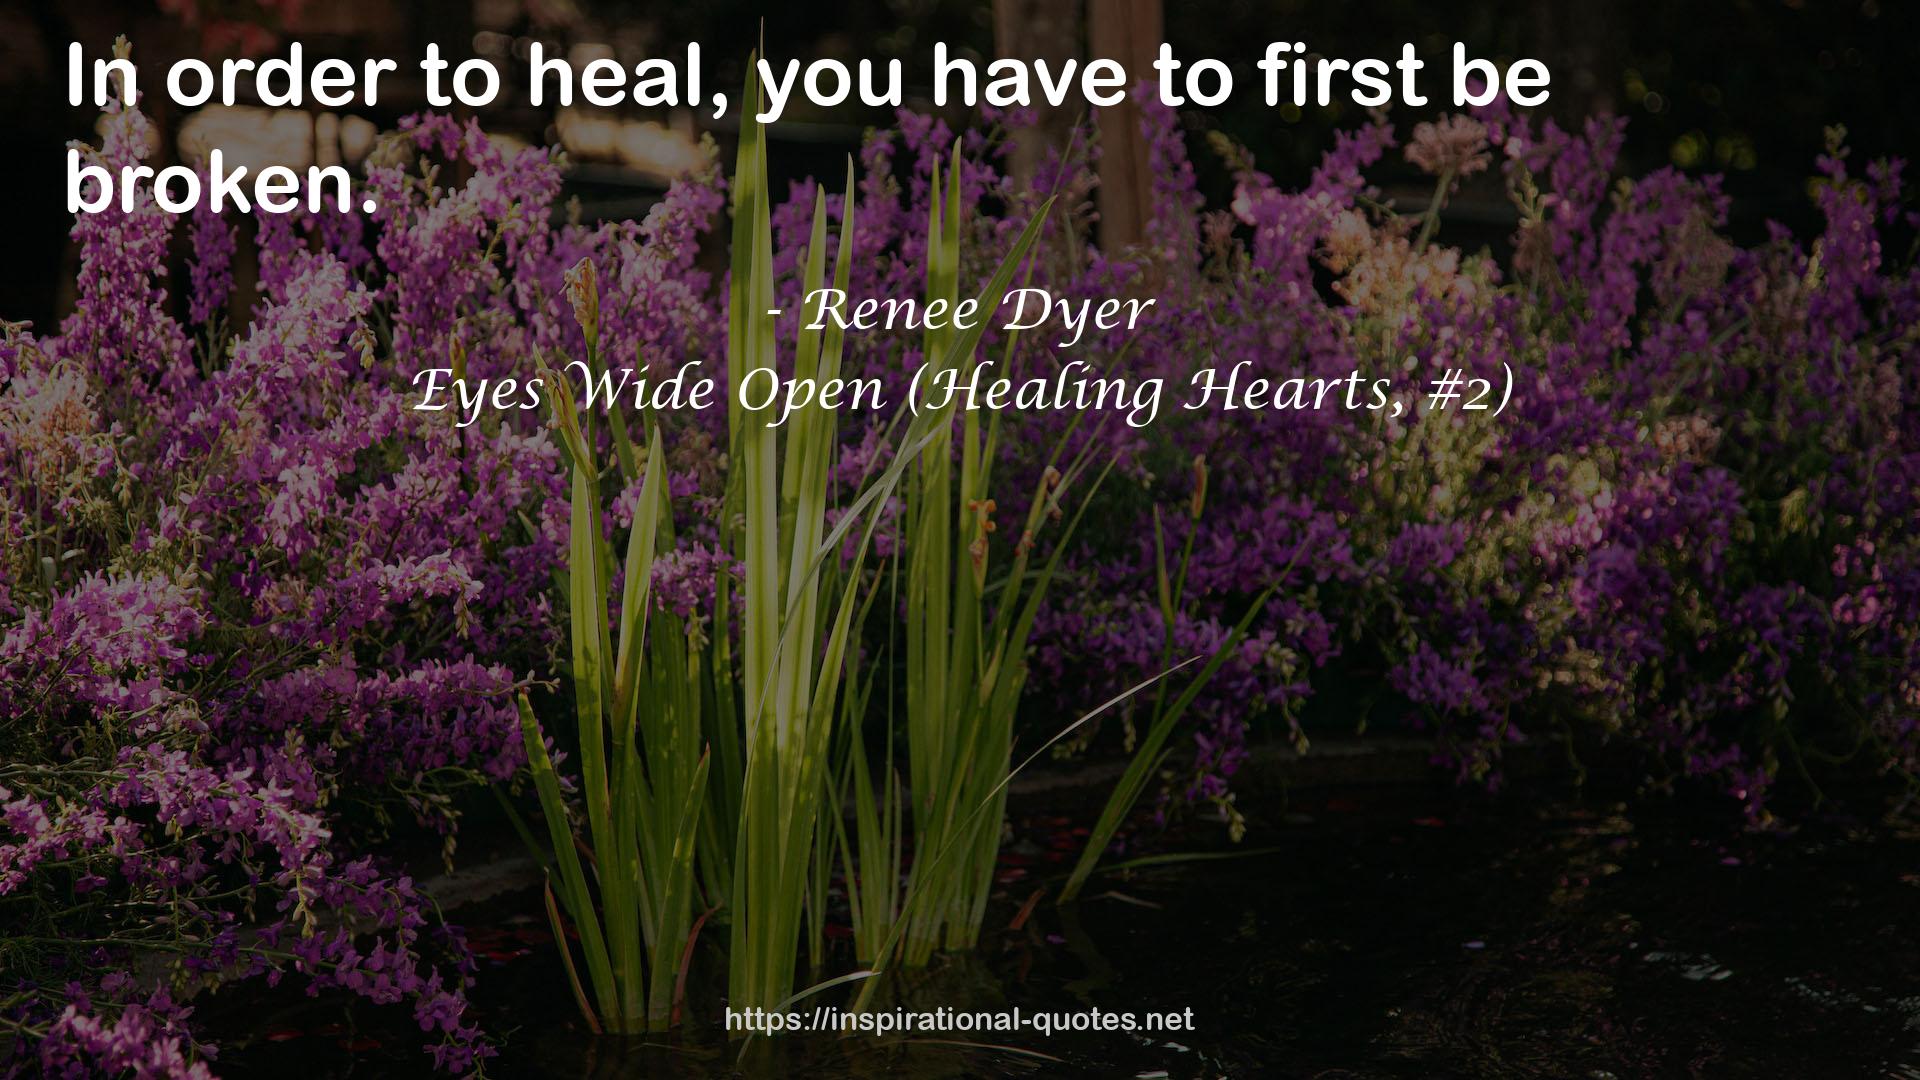 Eyes Wide Open (Healing Hearts, #2) QUOTES